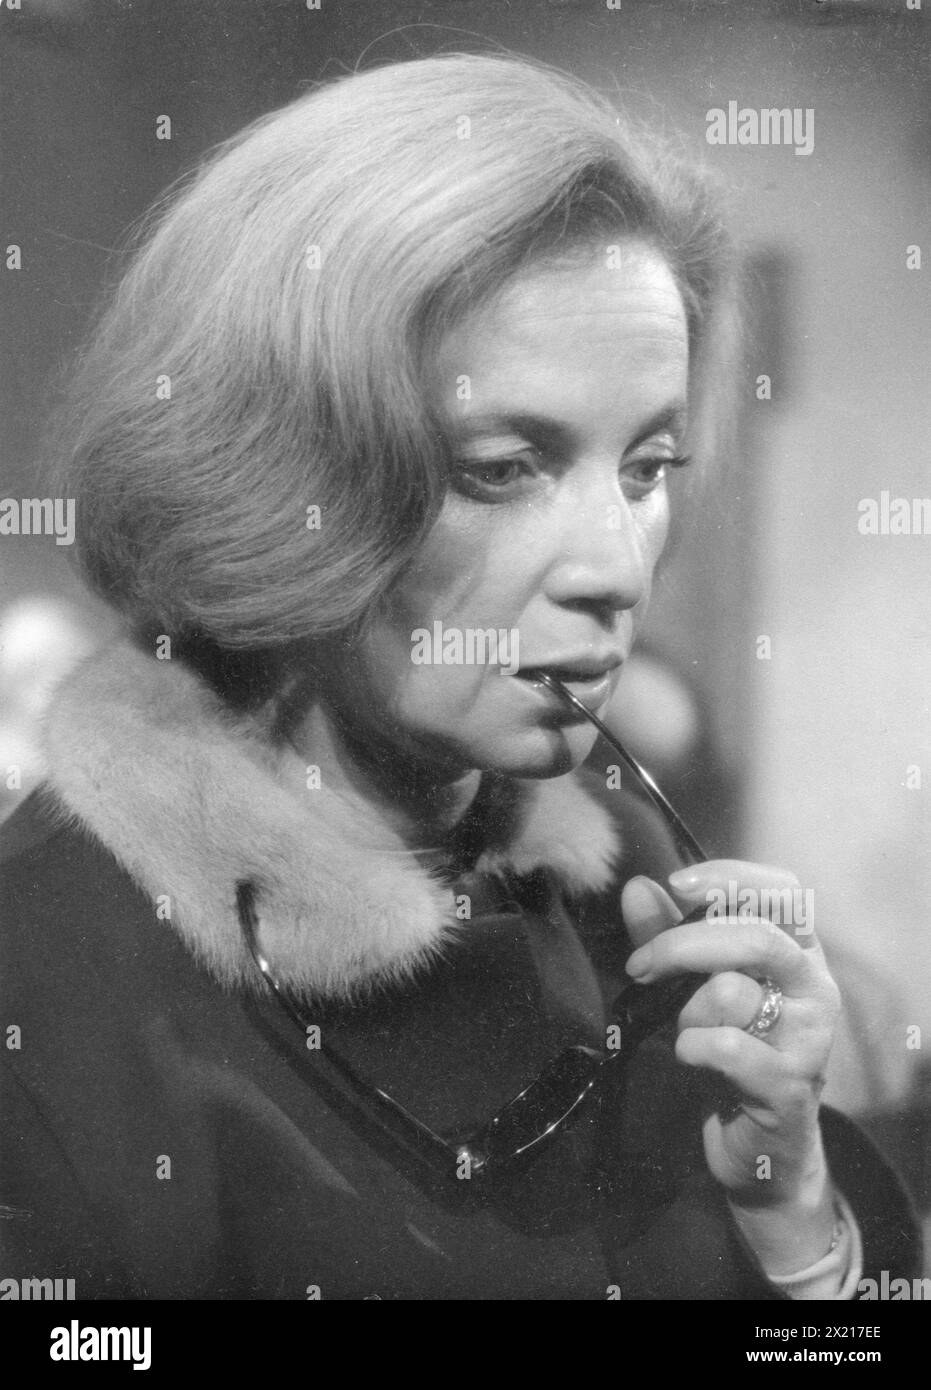 Wendt, Annemarie, German actress, in the TV series 'Das Fernsehgericht tagt', ADDITIONAL-RIGHTS-CLEARANCE-INFO-NOT-AVAILABLE Stock Photo